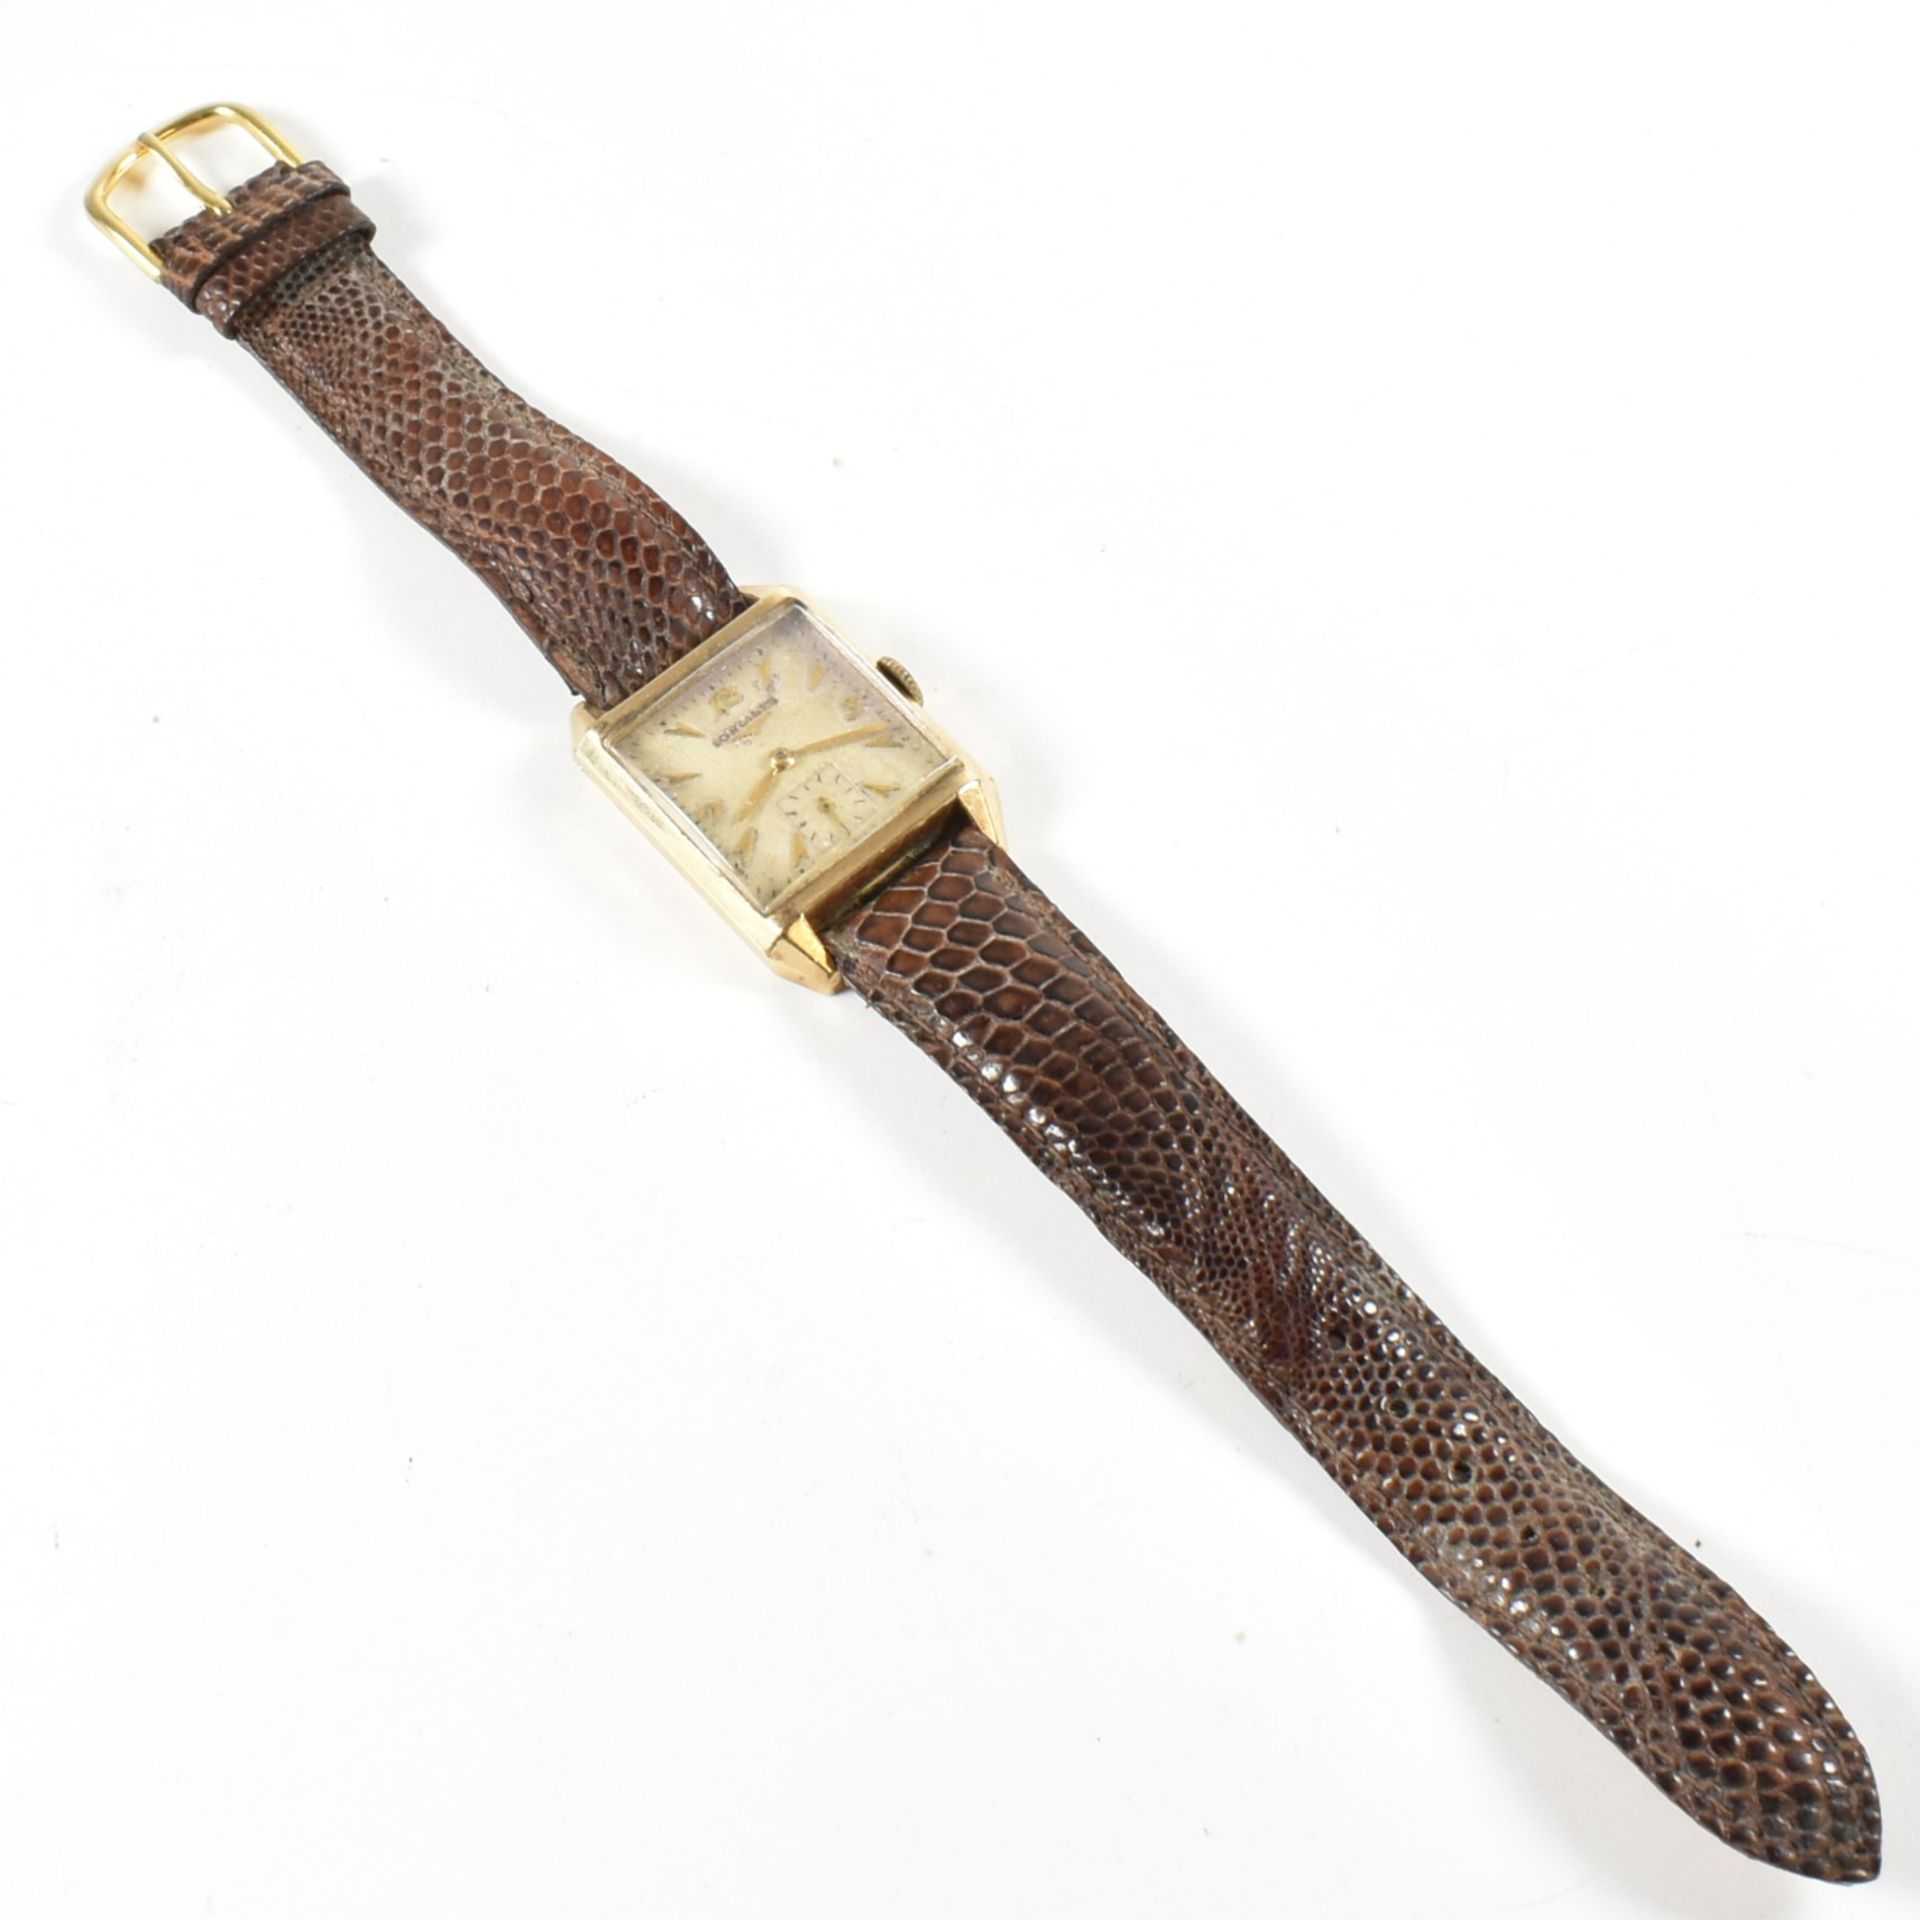 LONGINES 10CT GOLD FILLED WRISTWATCH ON LEATHER STRAP - Image 6 of 6